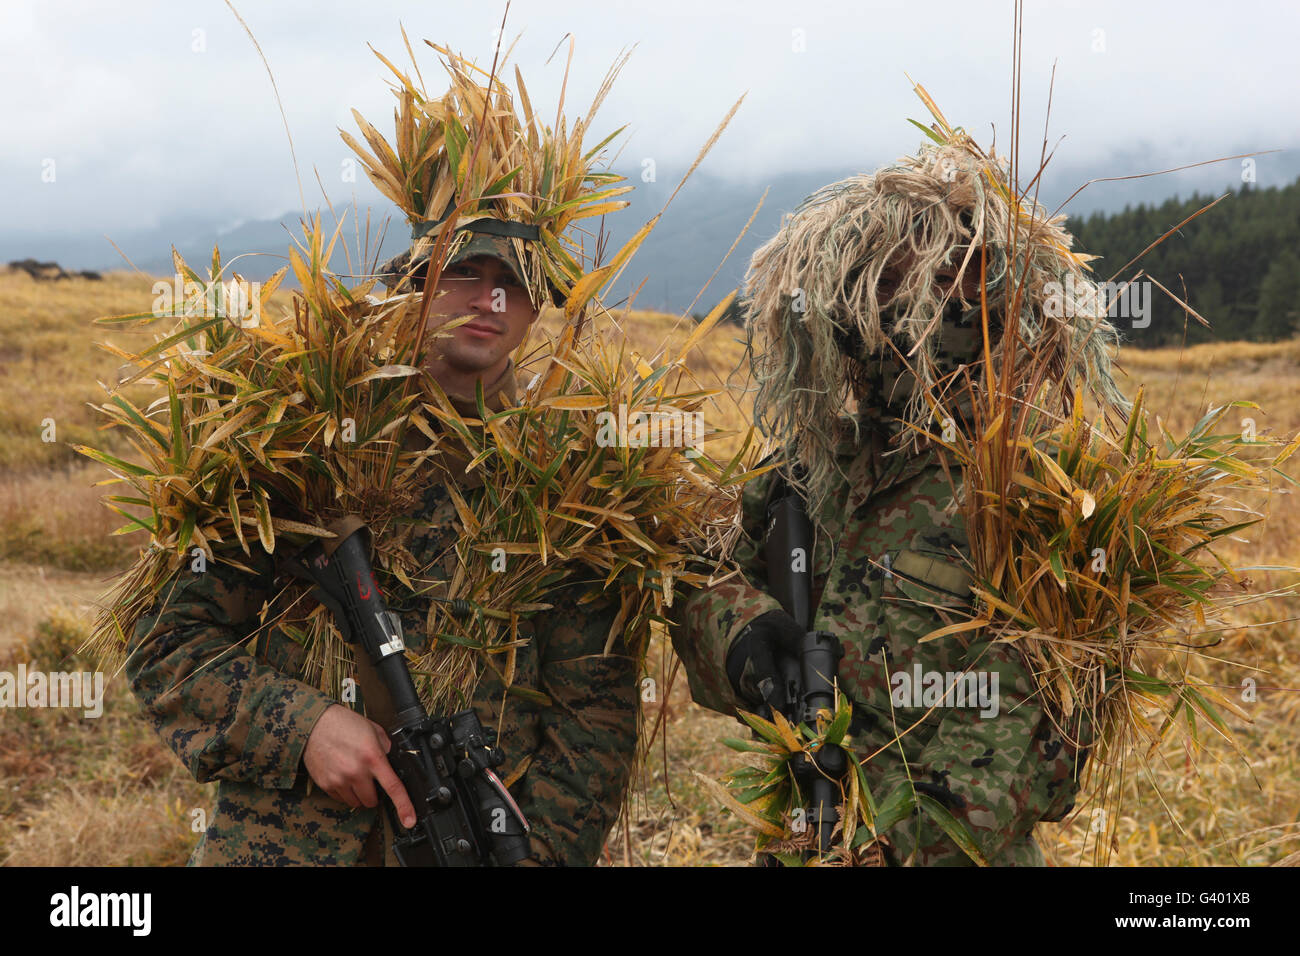 U.S. Marine and Japanese sniper await instructions during a training exercise. Stock Photo